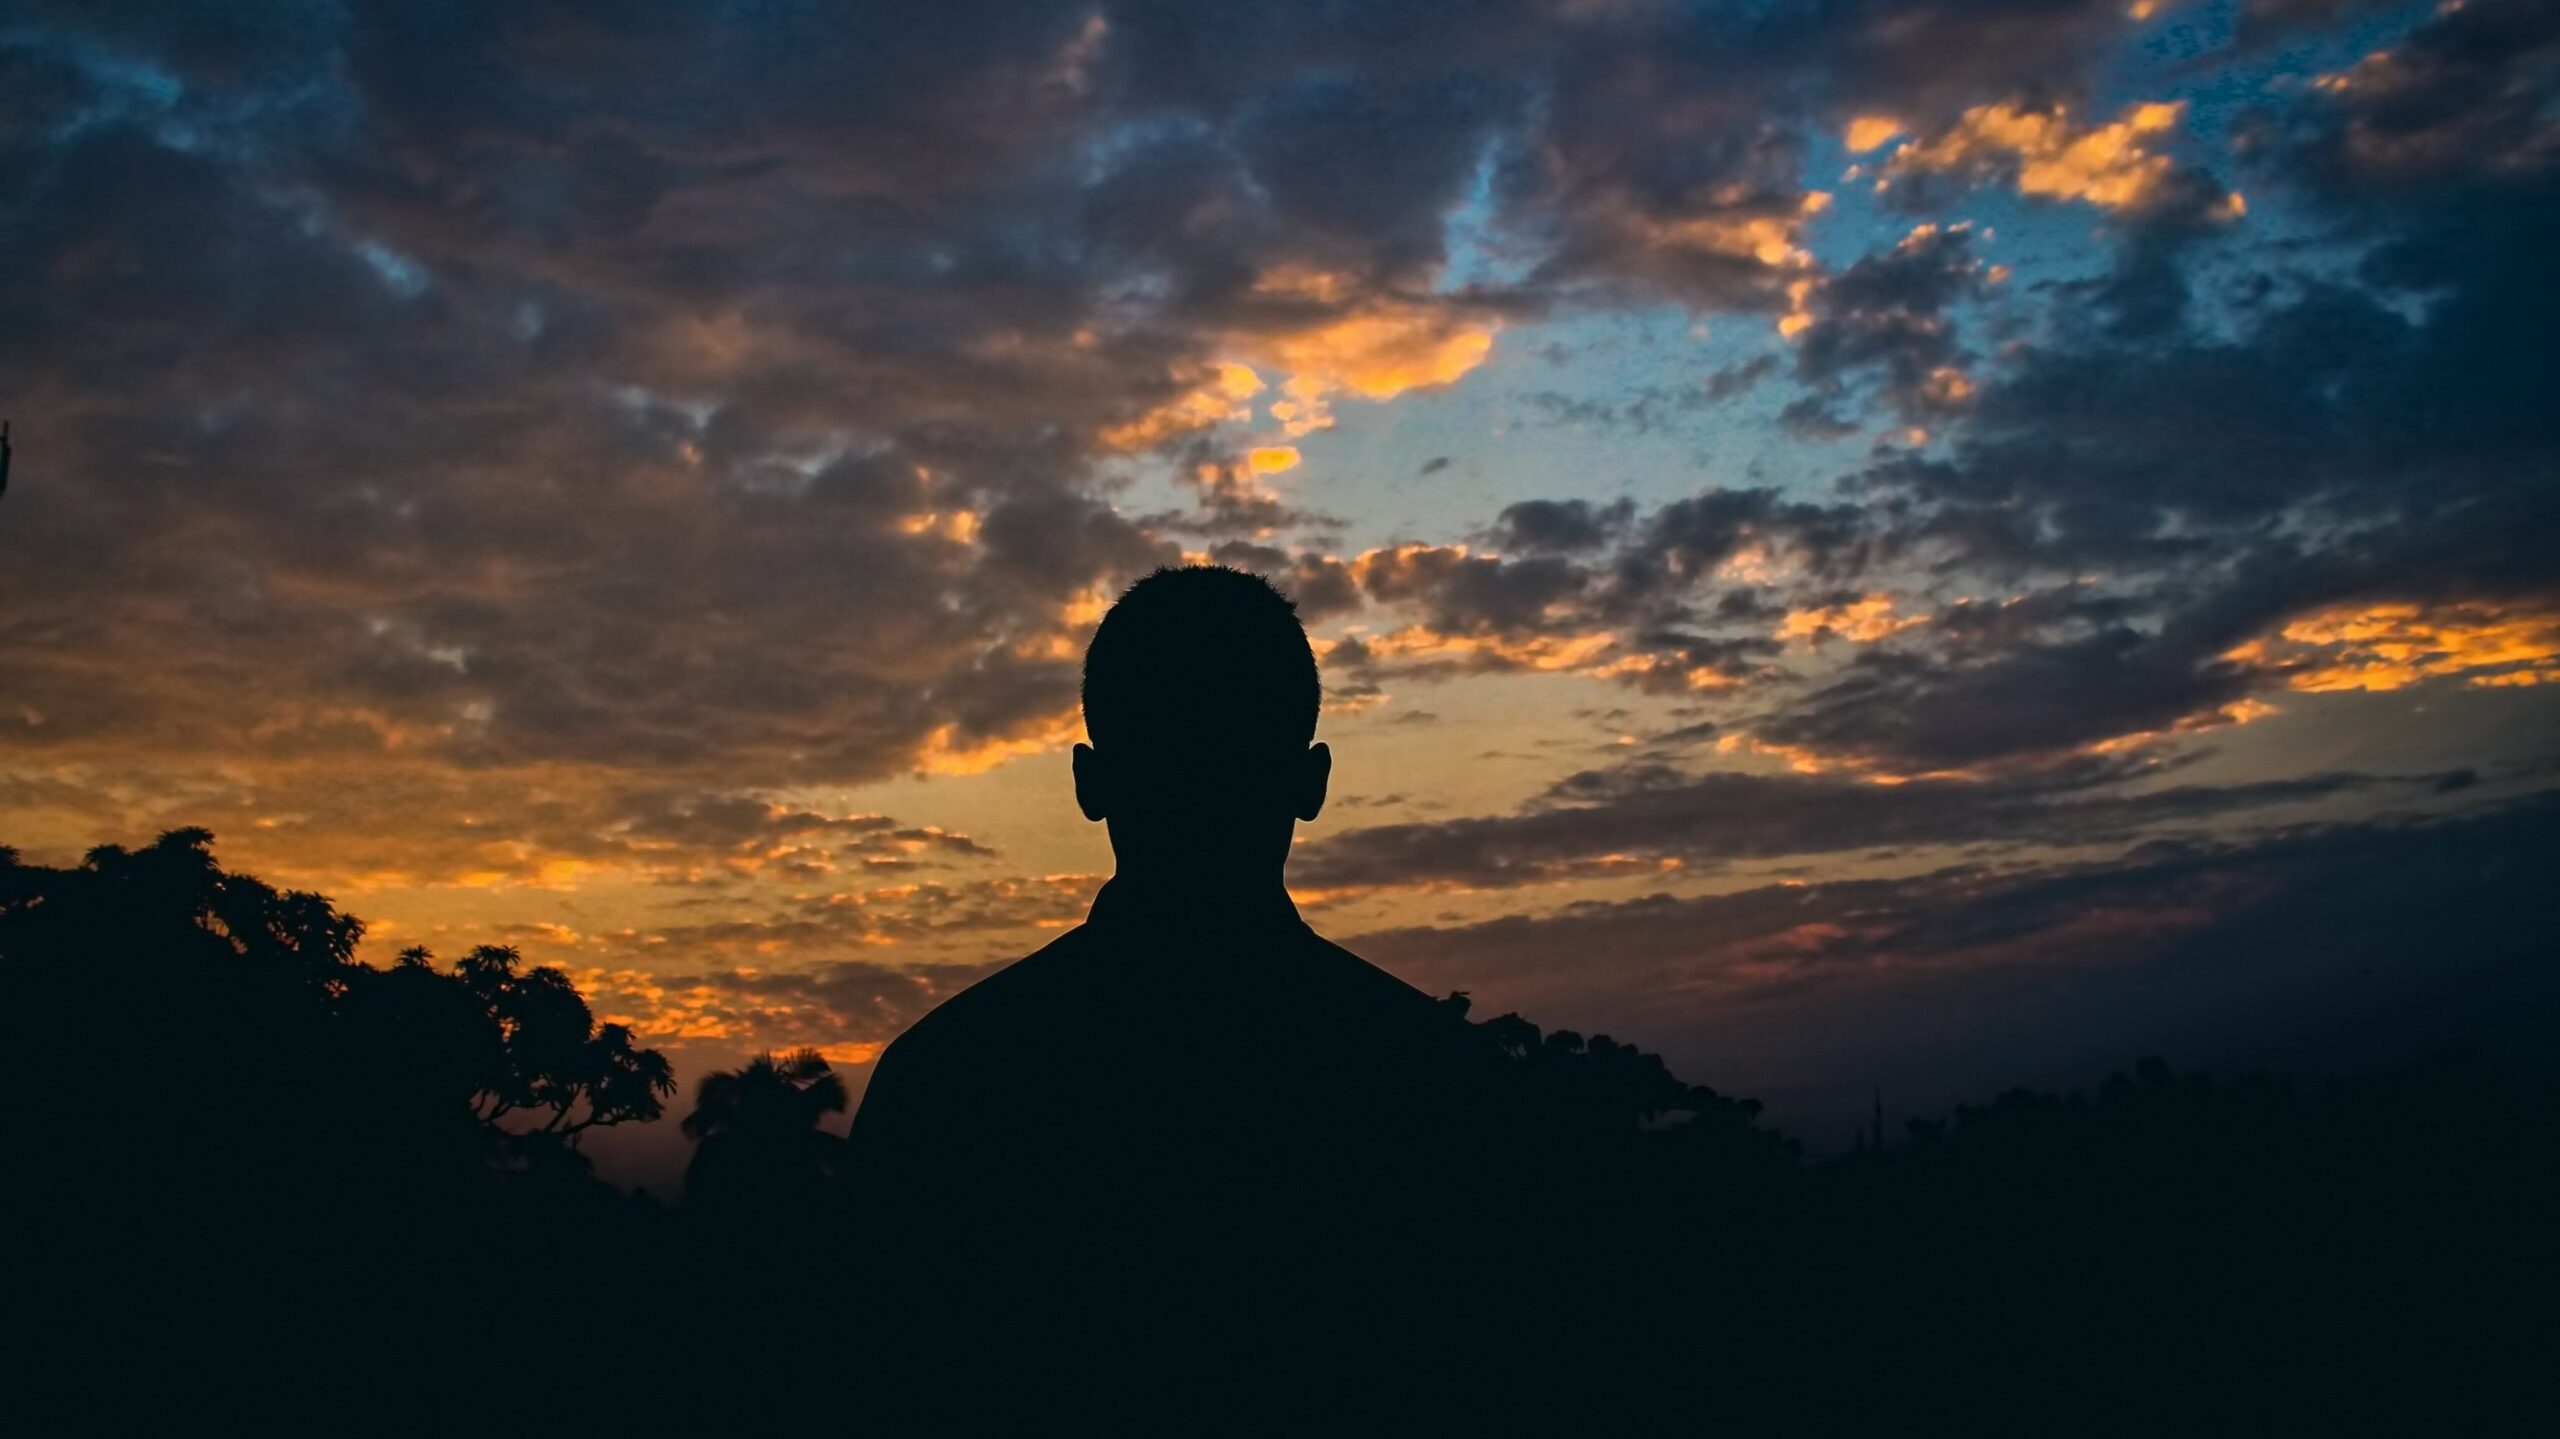 Silhouette of a man against a sky at golden hour